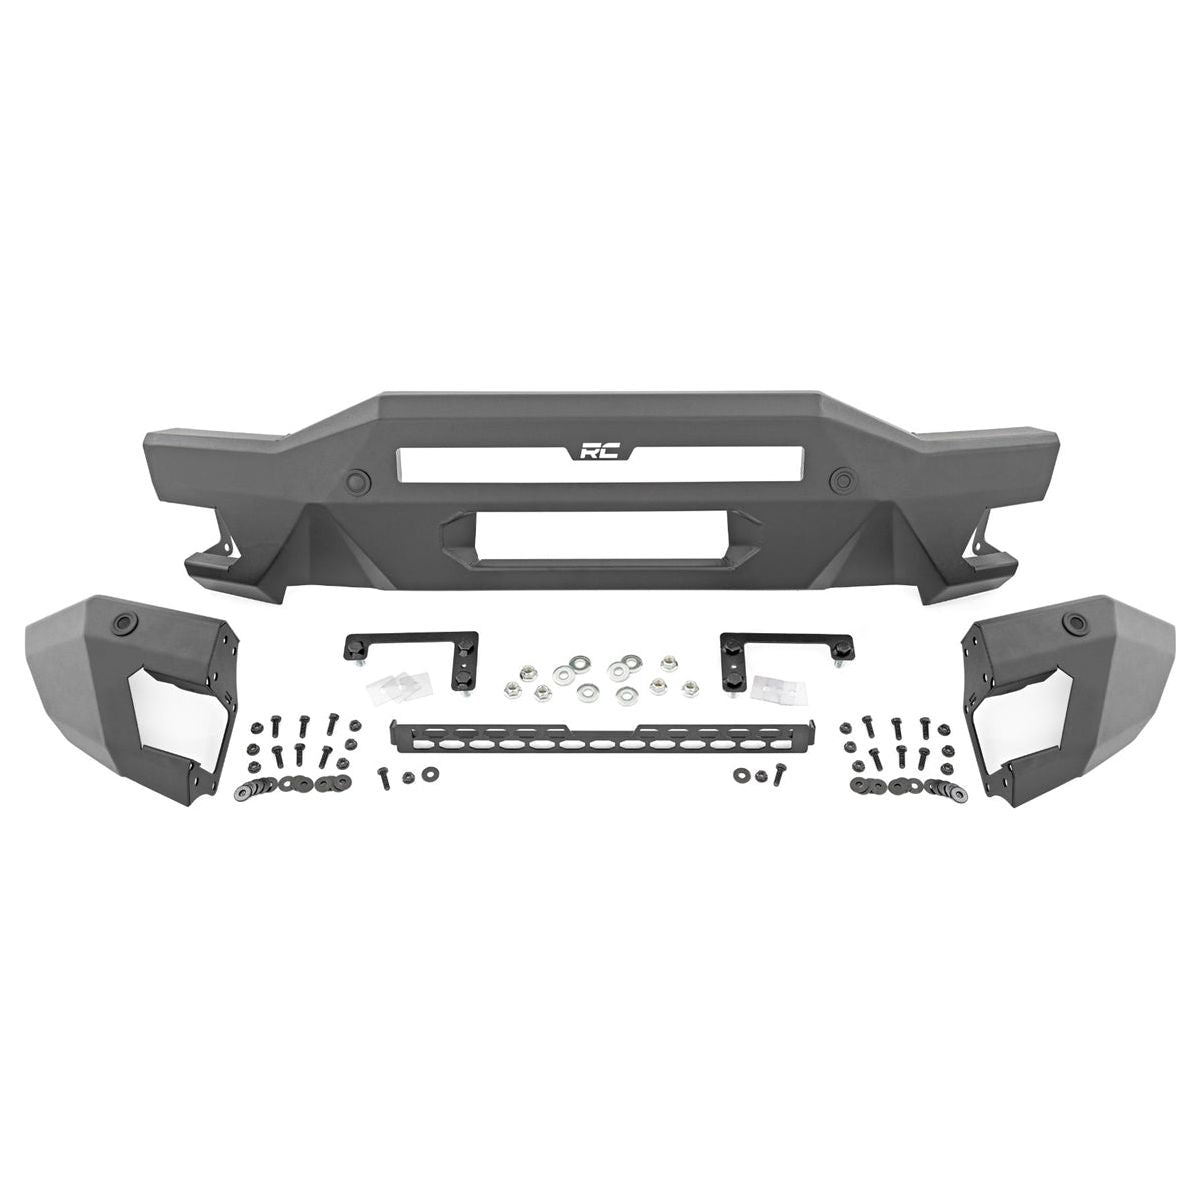 Rough Country Front Bumper Modular Full Wings  for 2021-C Ford Bronco